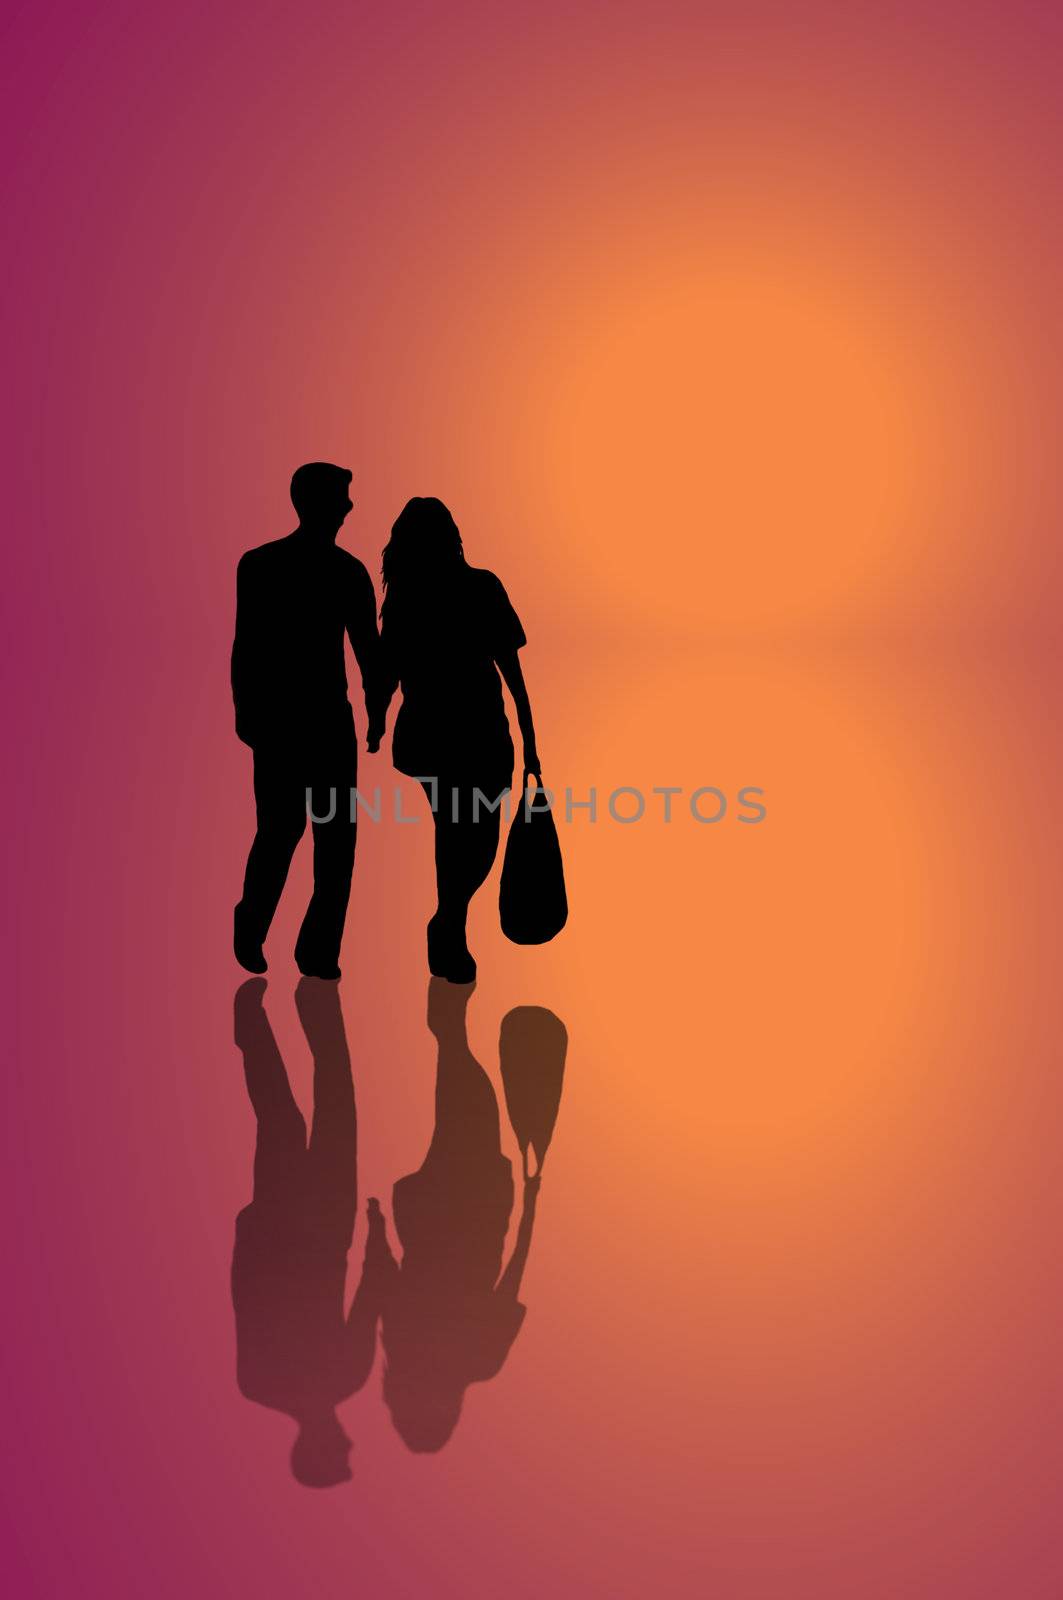 A silhouetted young couple walking on reflective surface towards a warm oranget light with pink background.